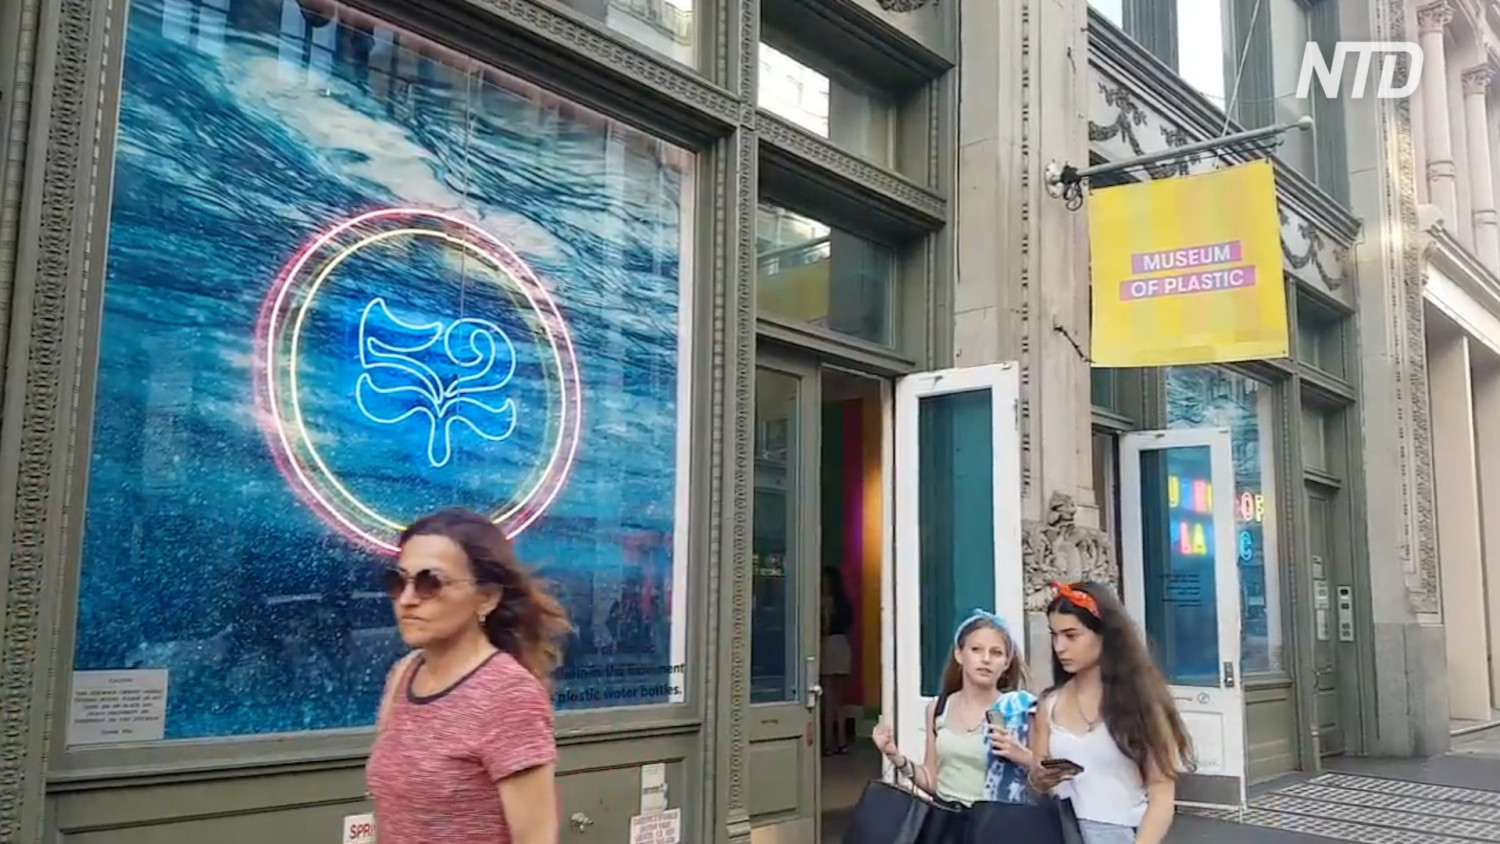 Museum Dedicated to Plastic Opens in NYC Highlighting Environmental Impact